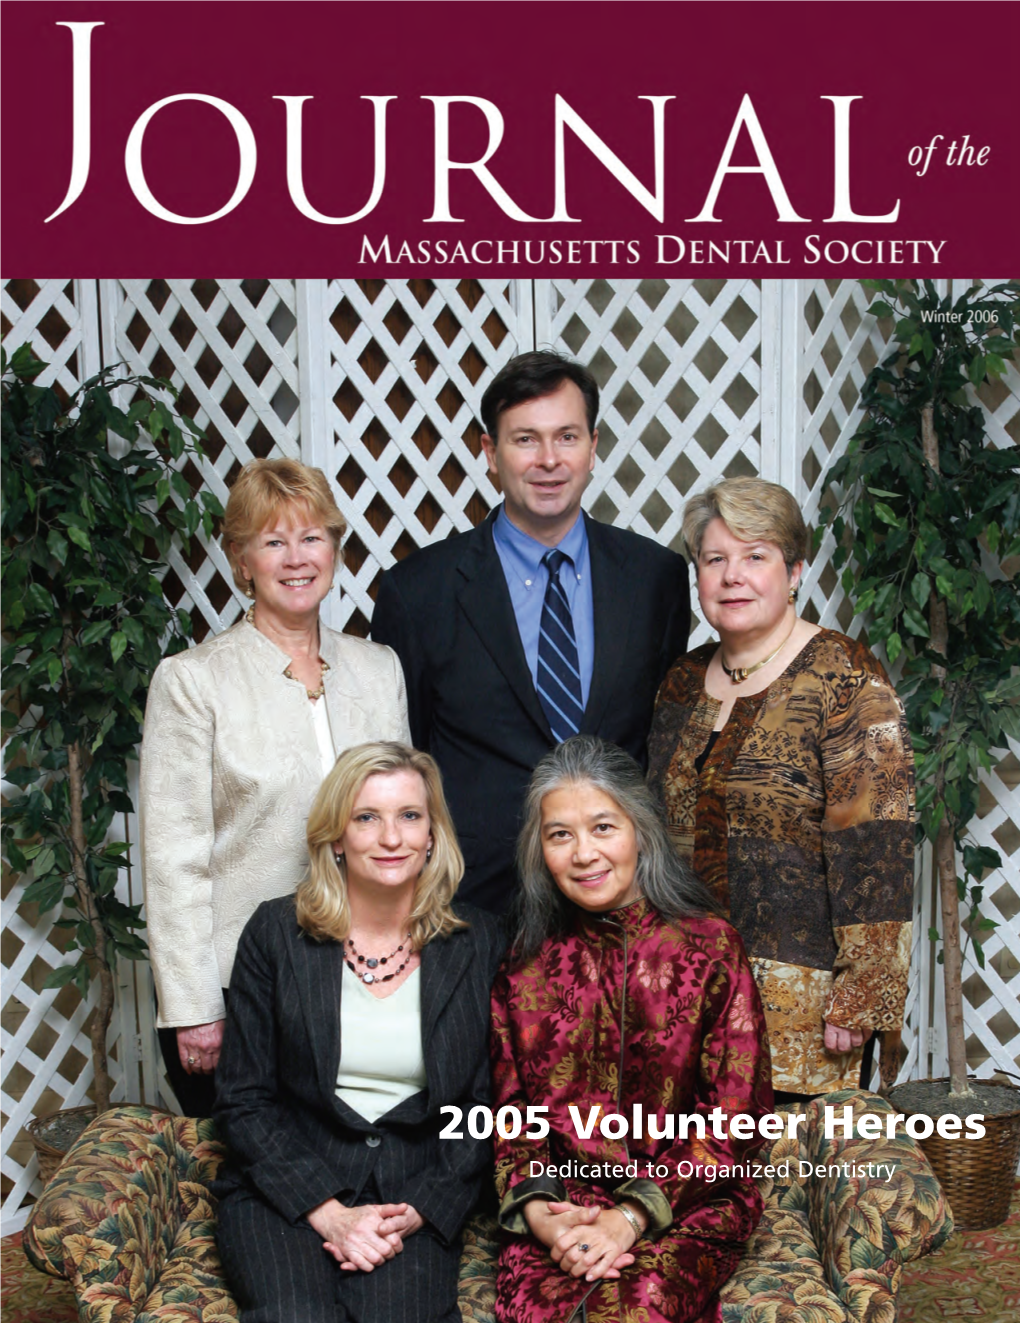 2005 Volunteer Heroes Dedicated to Organized Dentistry Winter Journal 2006.Qxp 1/9/2006 11:45 AM Page 4